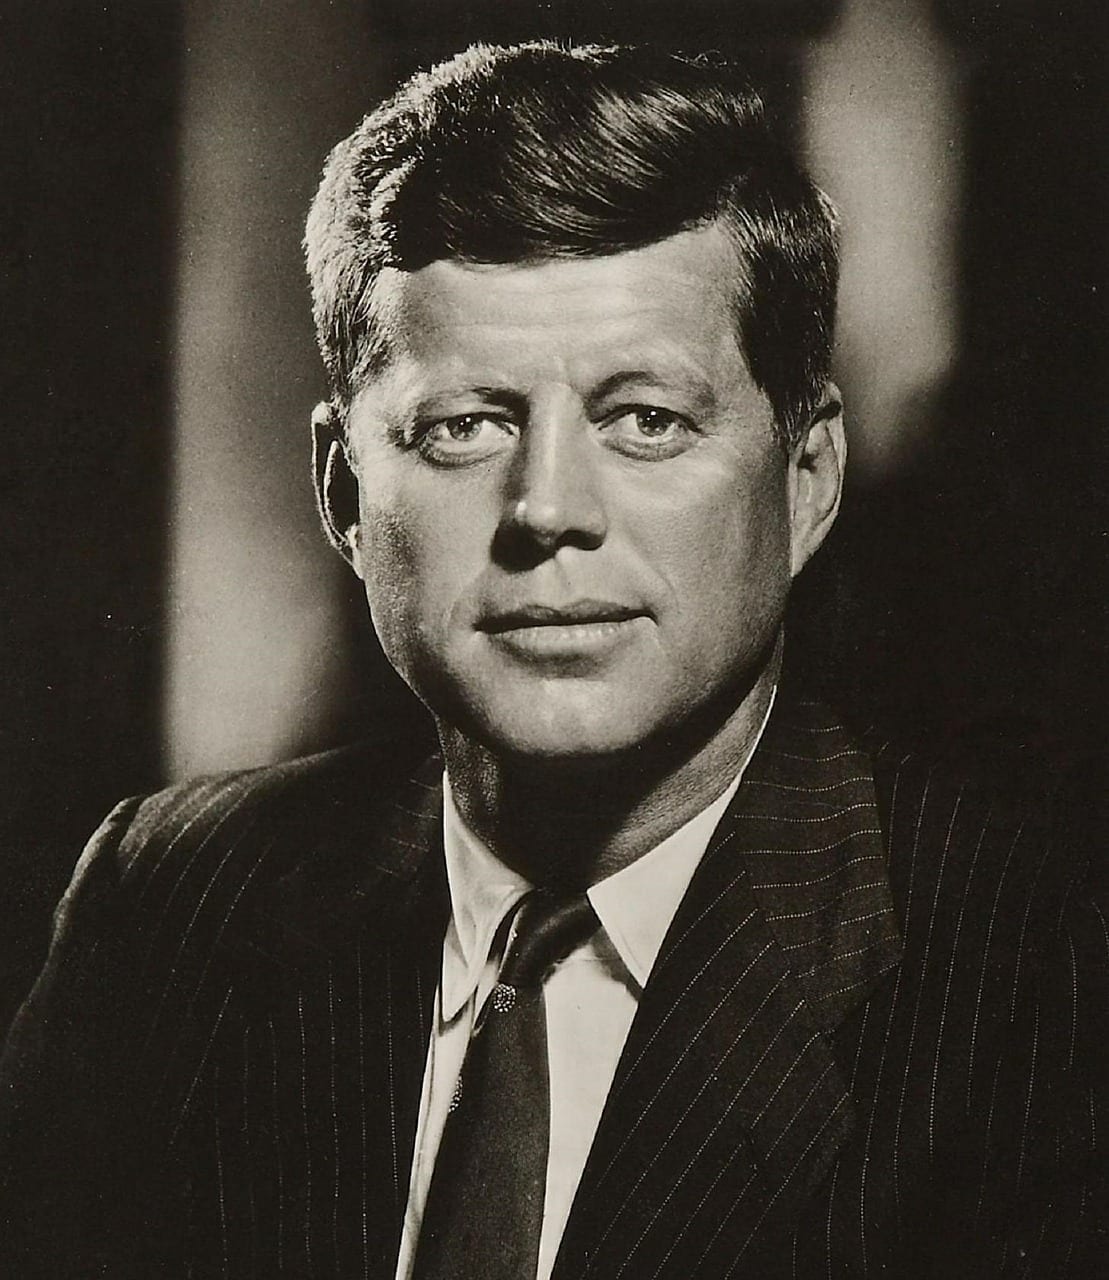 Facts about JFK assassination